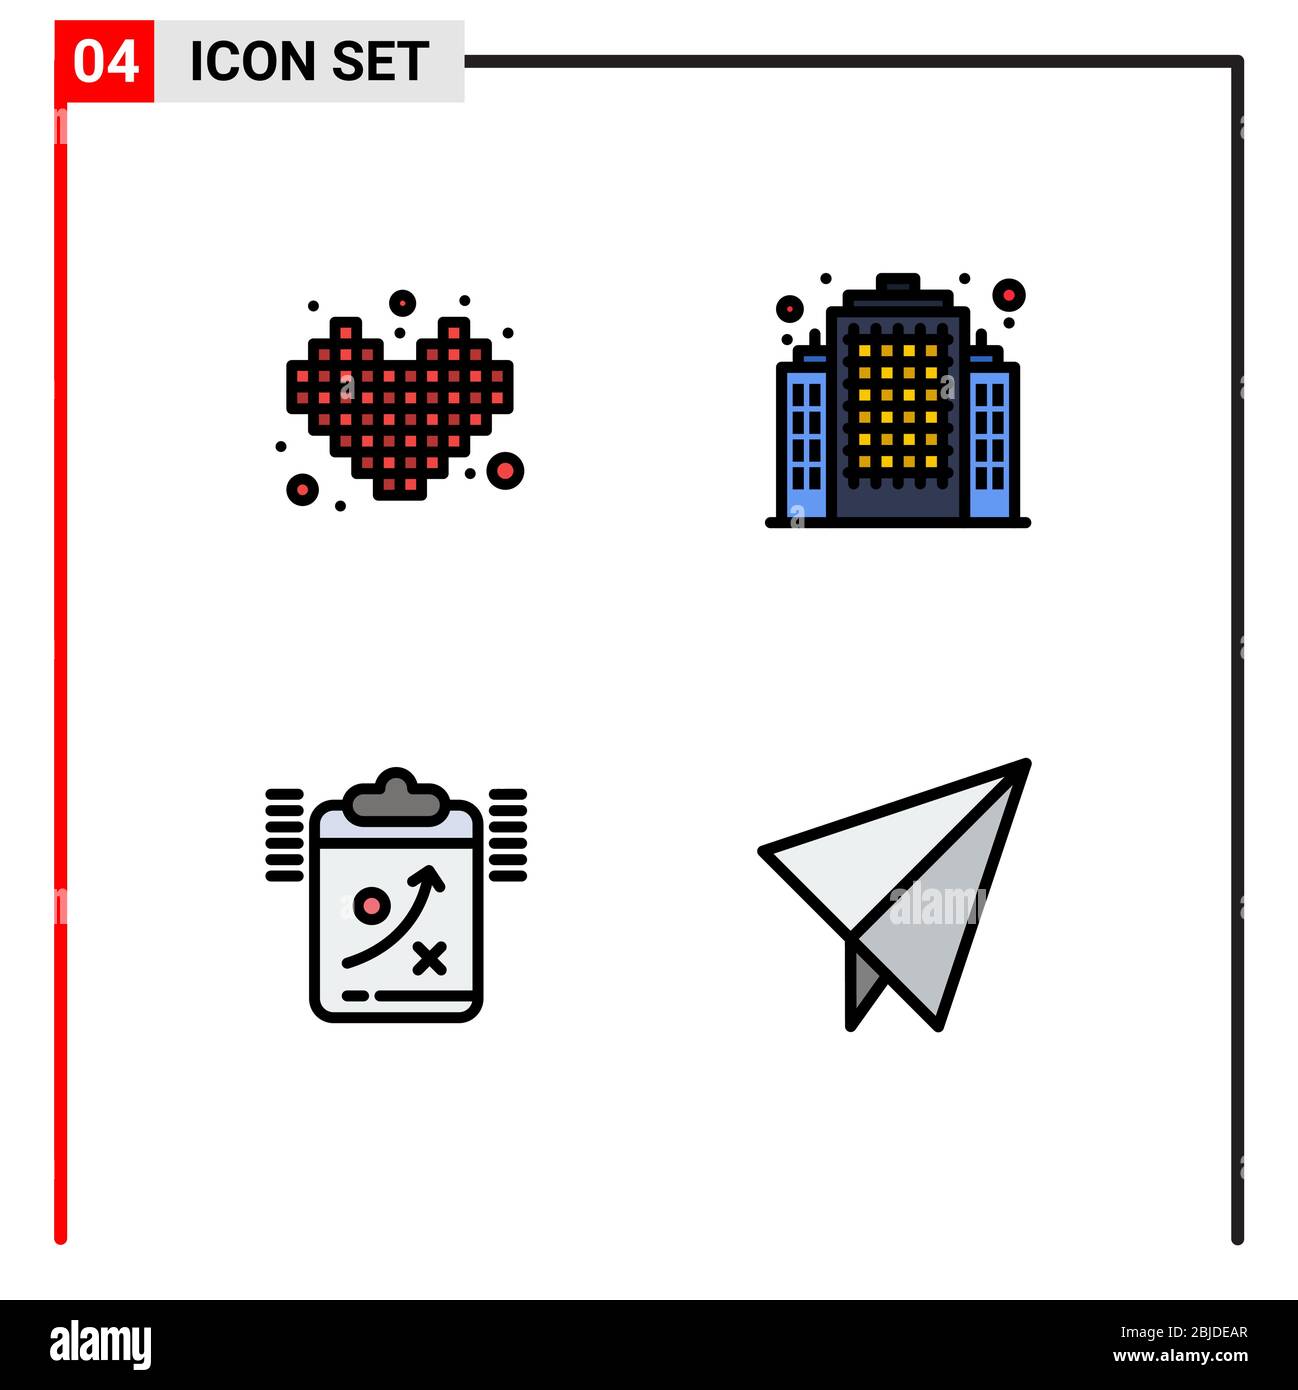 Tetris Block Game Interface Royalty Free SVG, Cliparts, Vectors, and Stock  Illustration. Image 31796773.